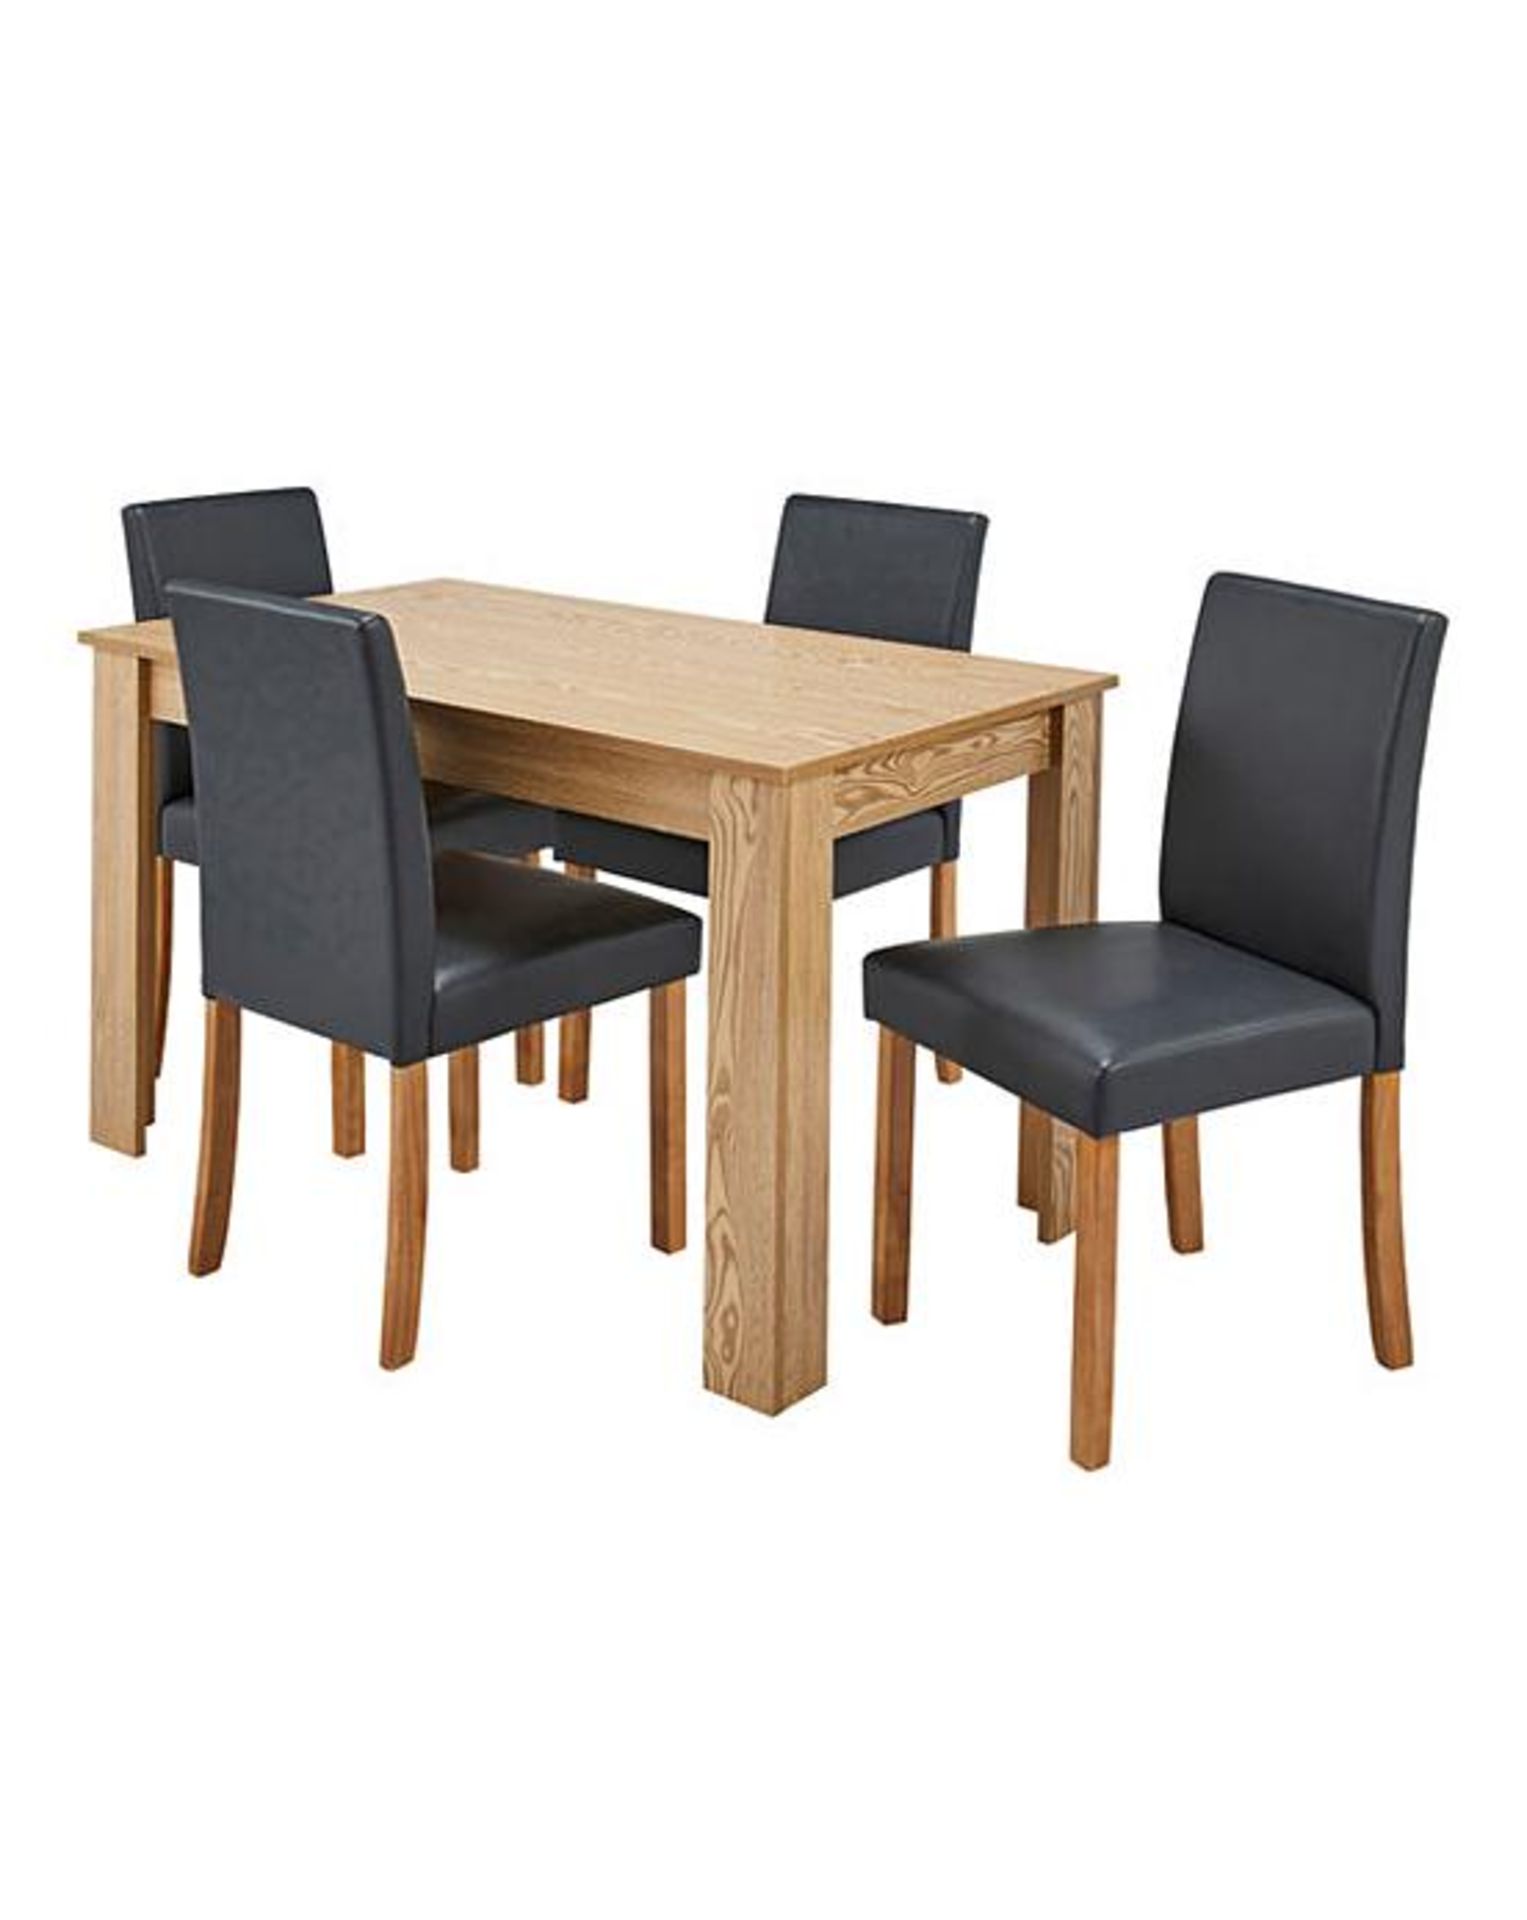 (R3P) RRP £249. Ava Rectangular Dining Table With 4x Faux Leather Chairs Grey Oak Effect.